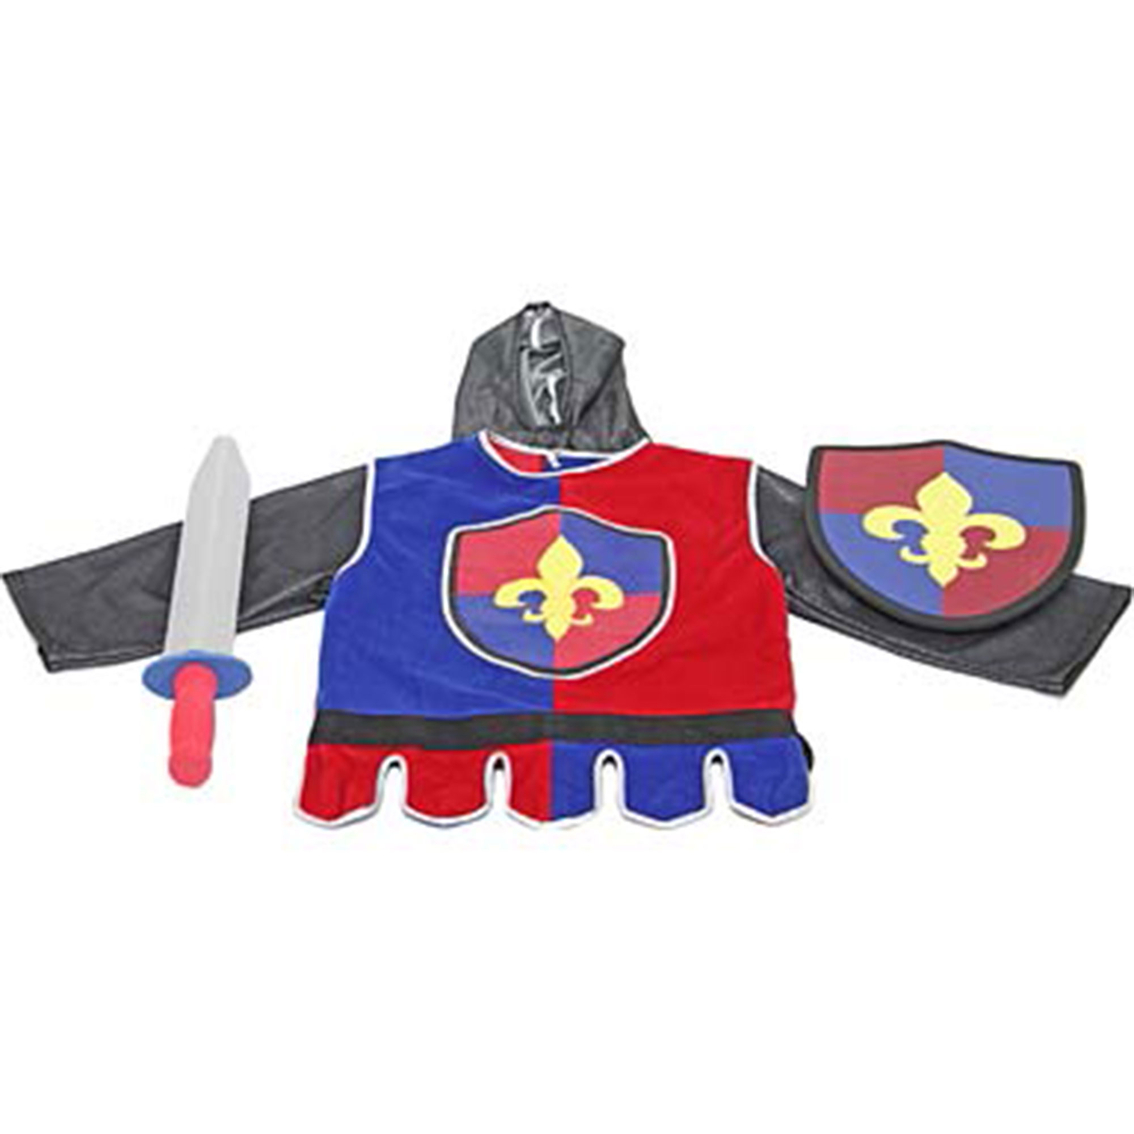 Melissa and Doug Knight Role Play Costume Set - Image 2 of 2